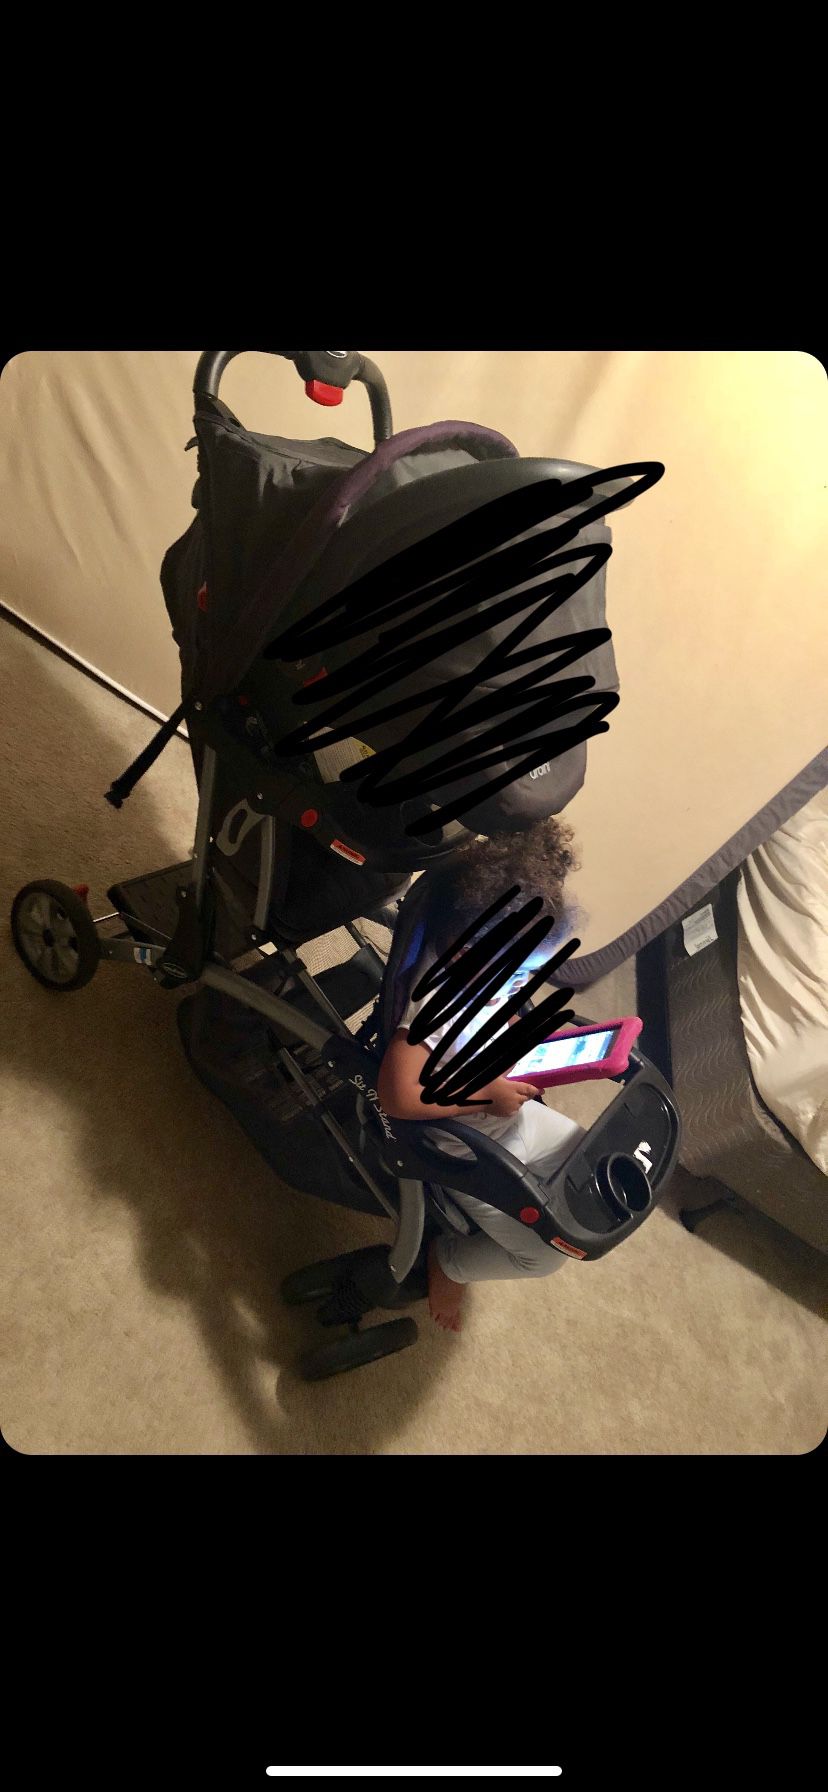 Sit and stand double stroller